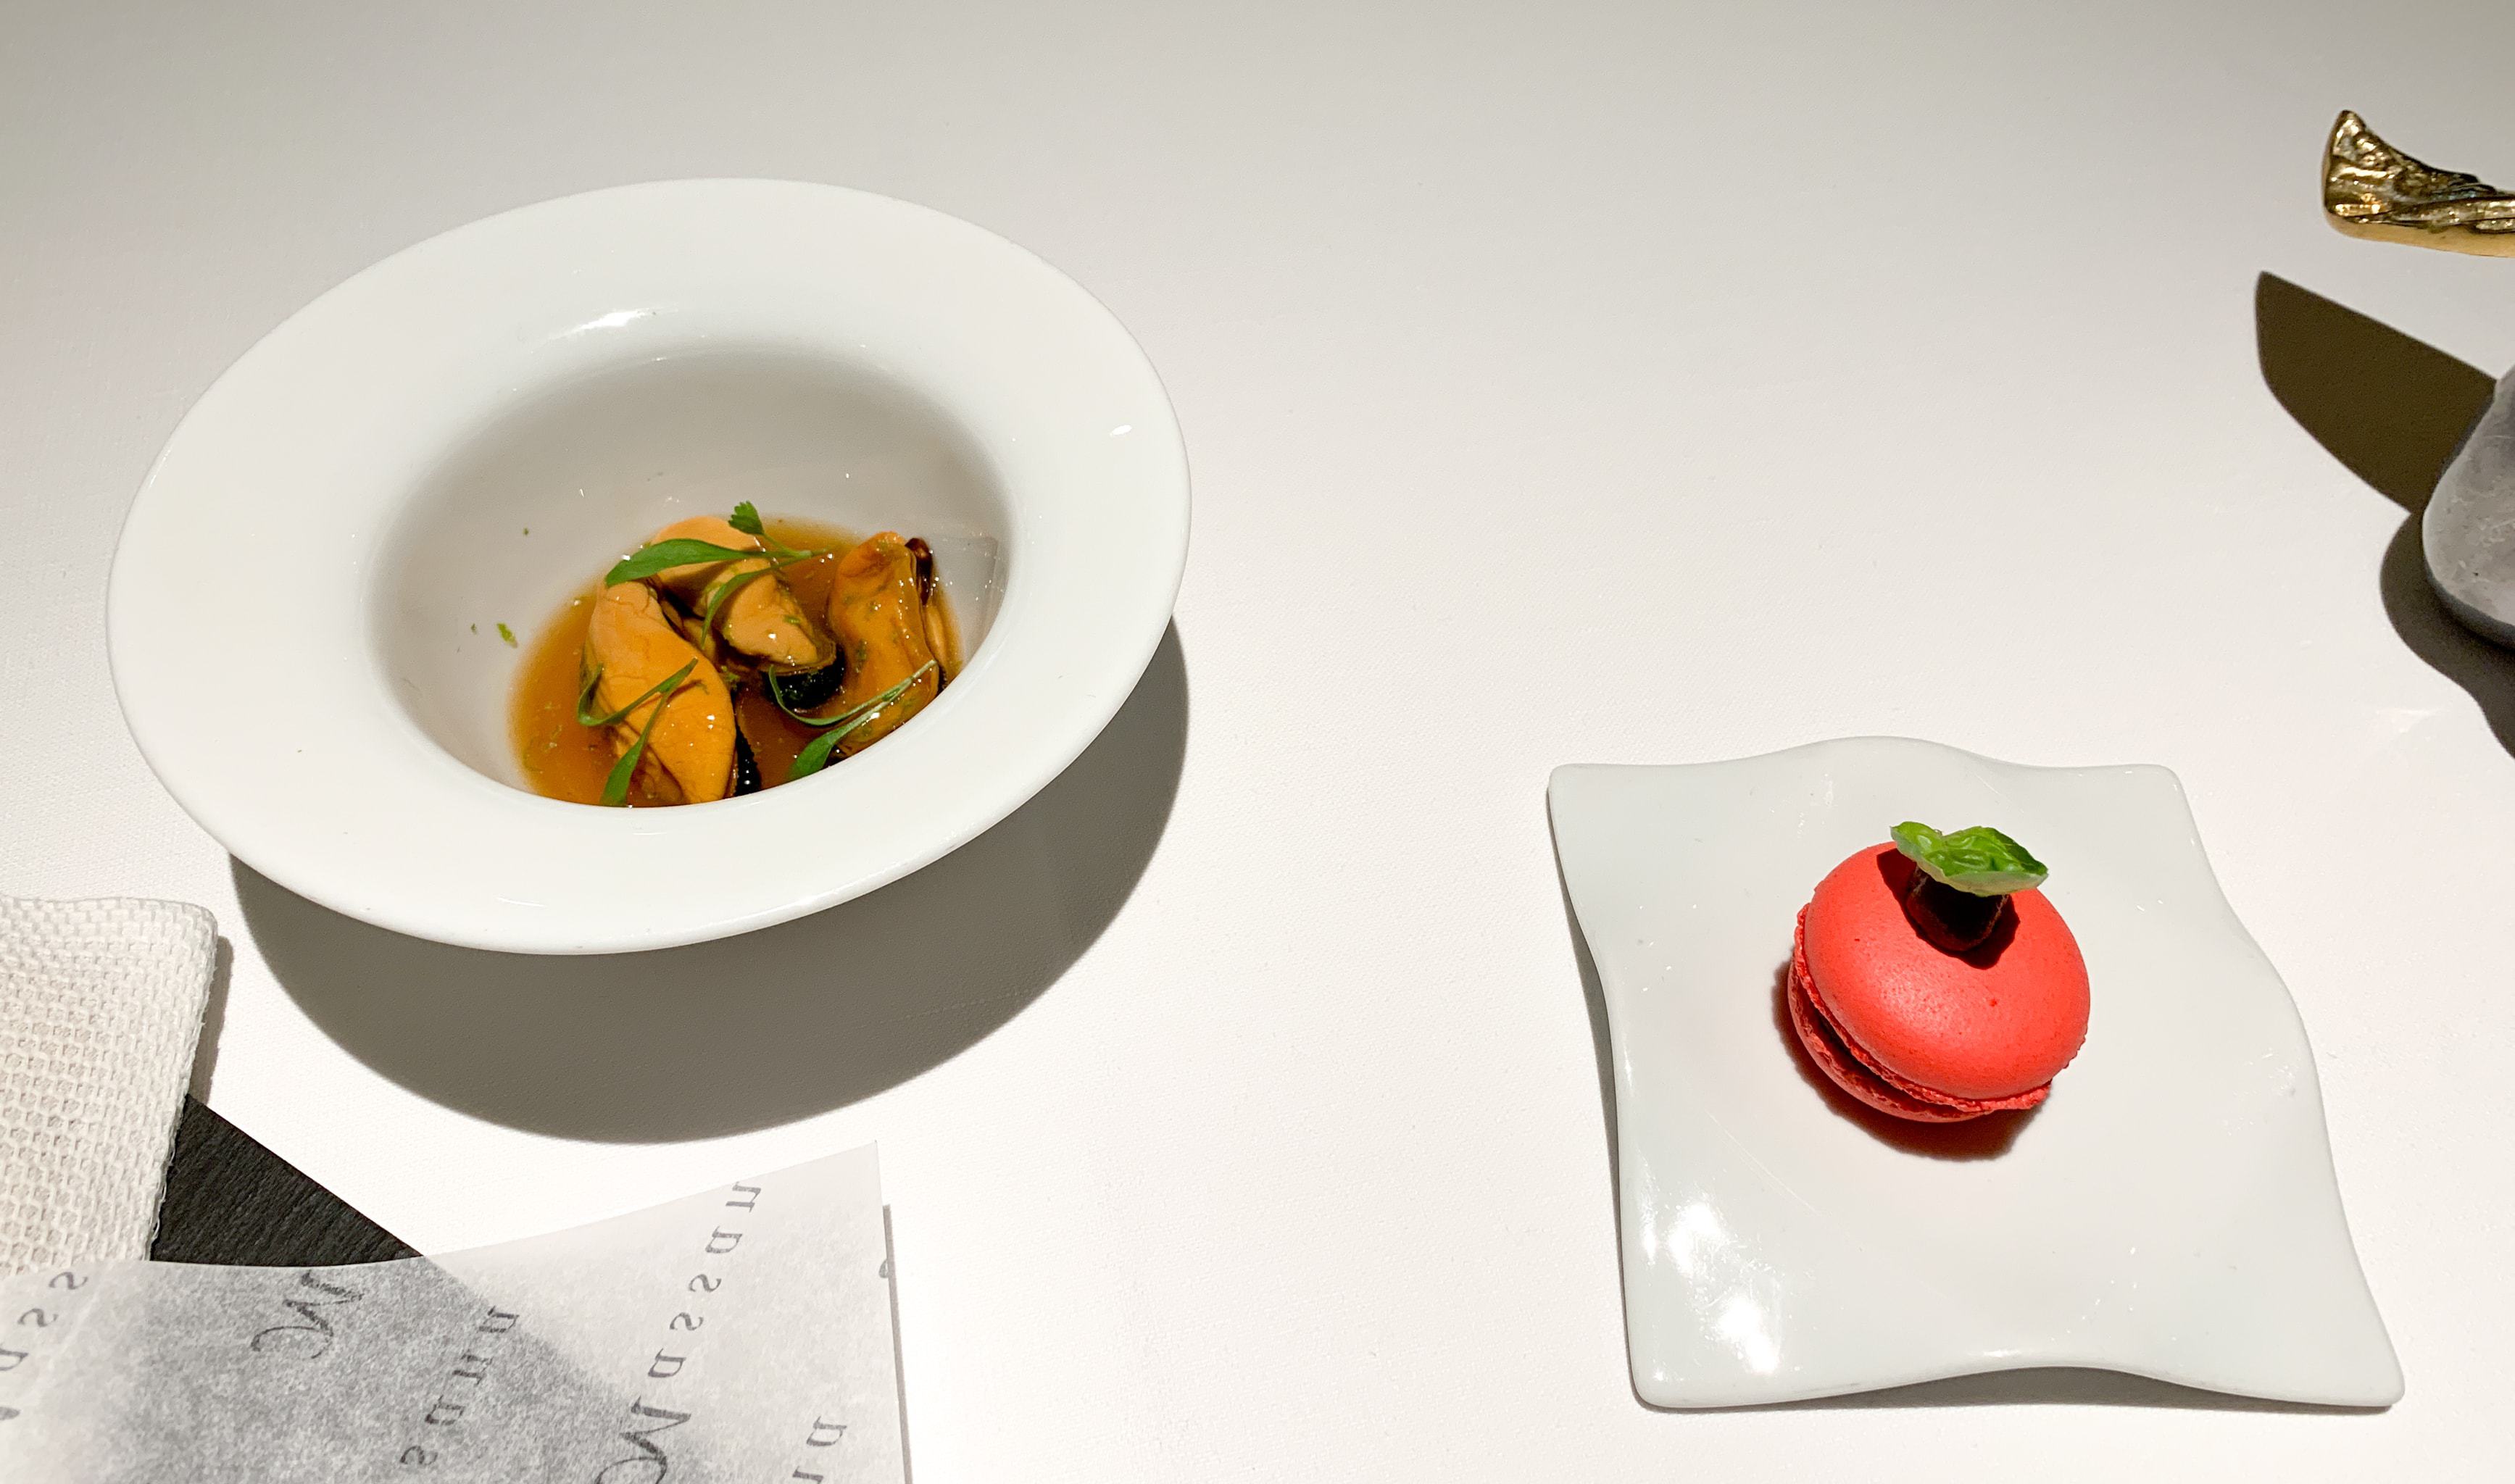 Marinated mussels, lime, and coriander (left), and "Macaron" caprese (right) at Massana Restaurant